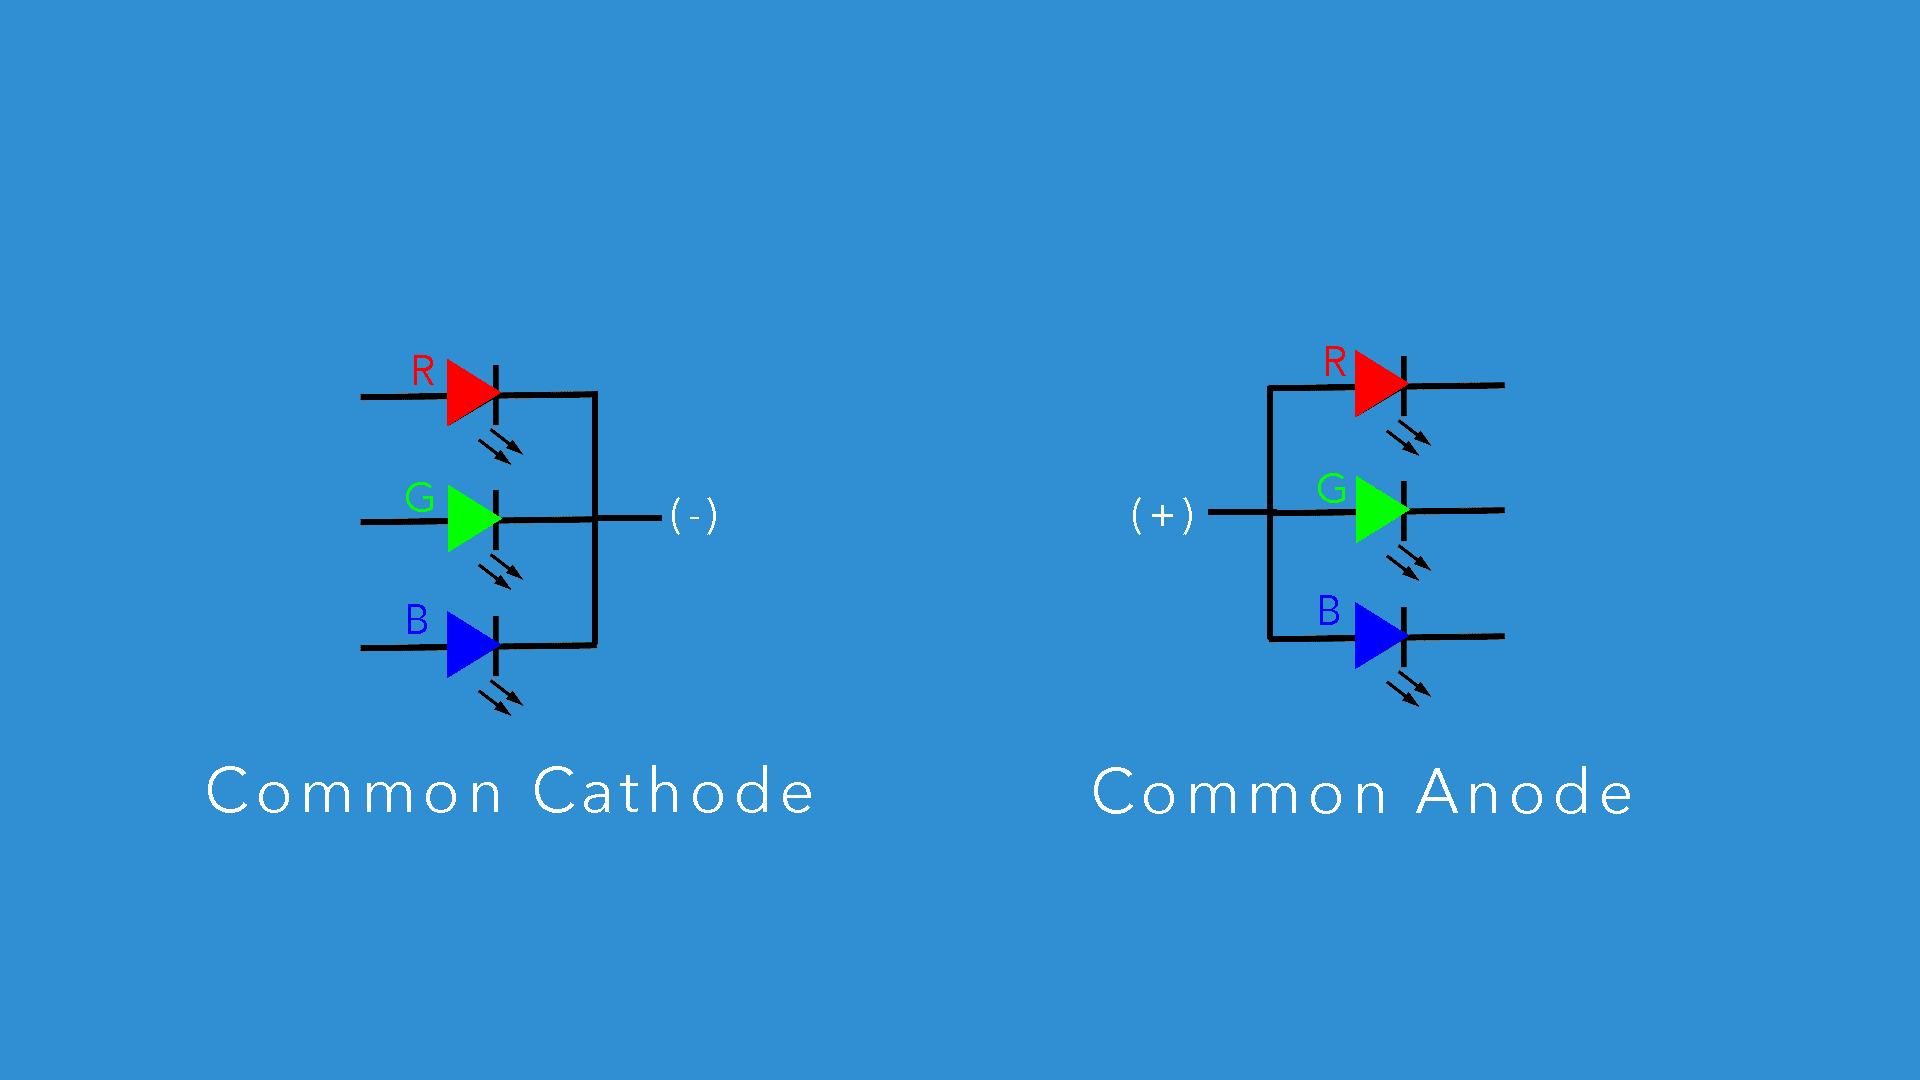 the relationship between a cathode and an anode involves